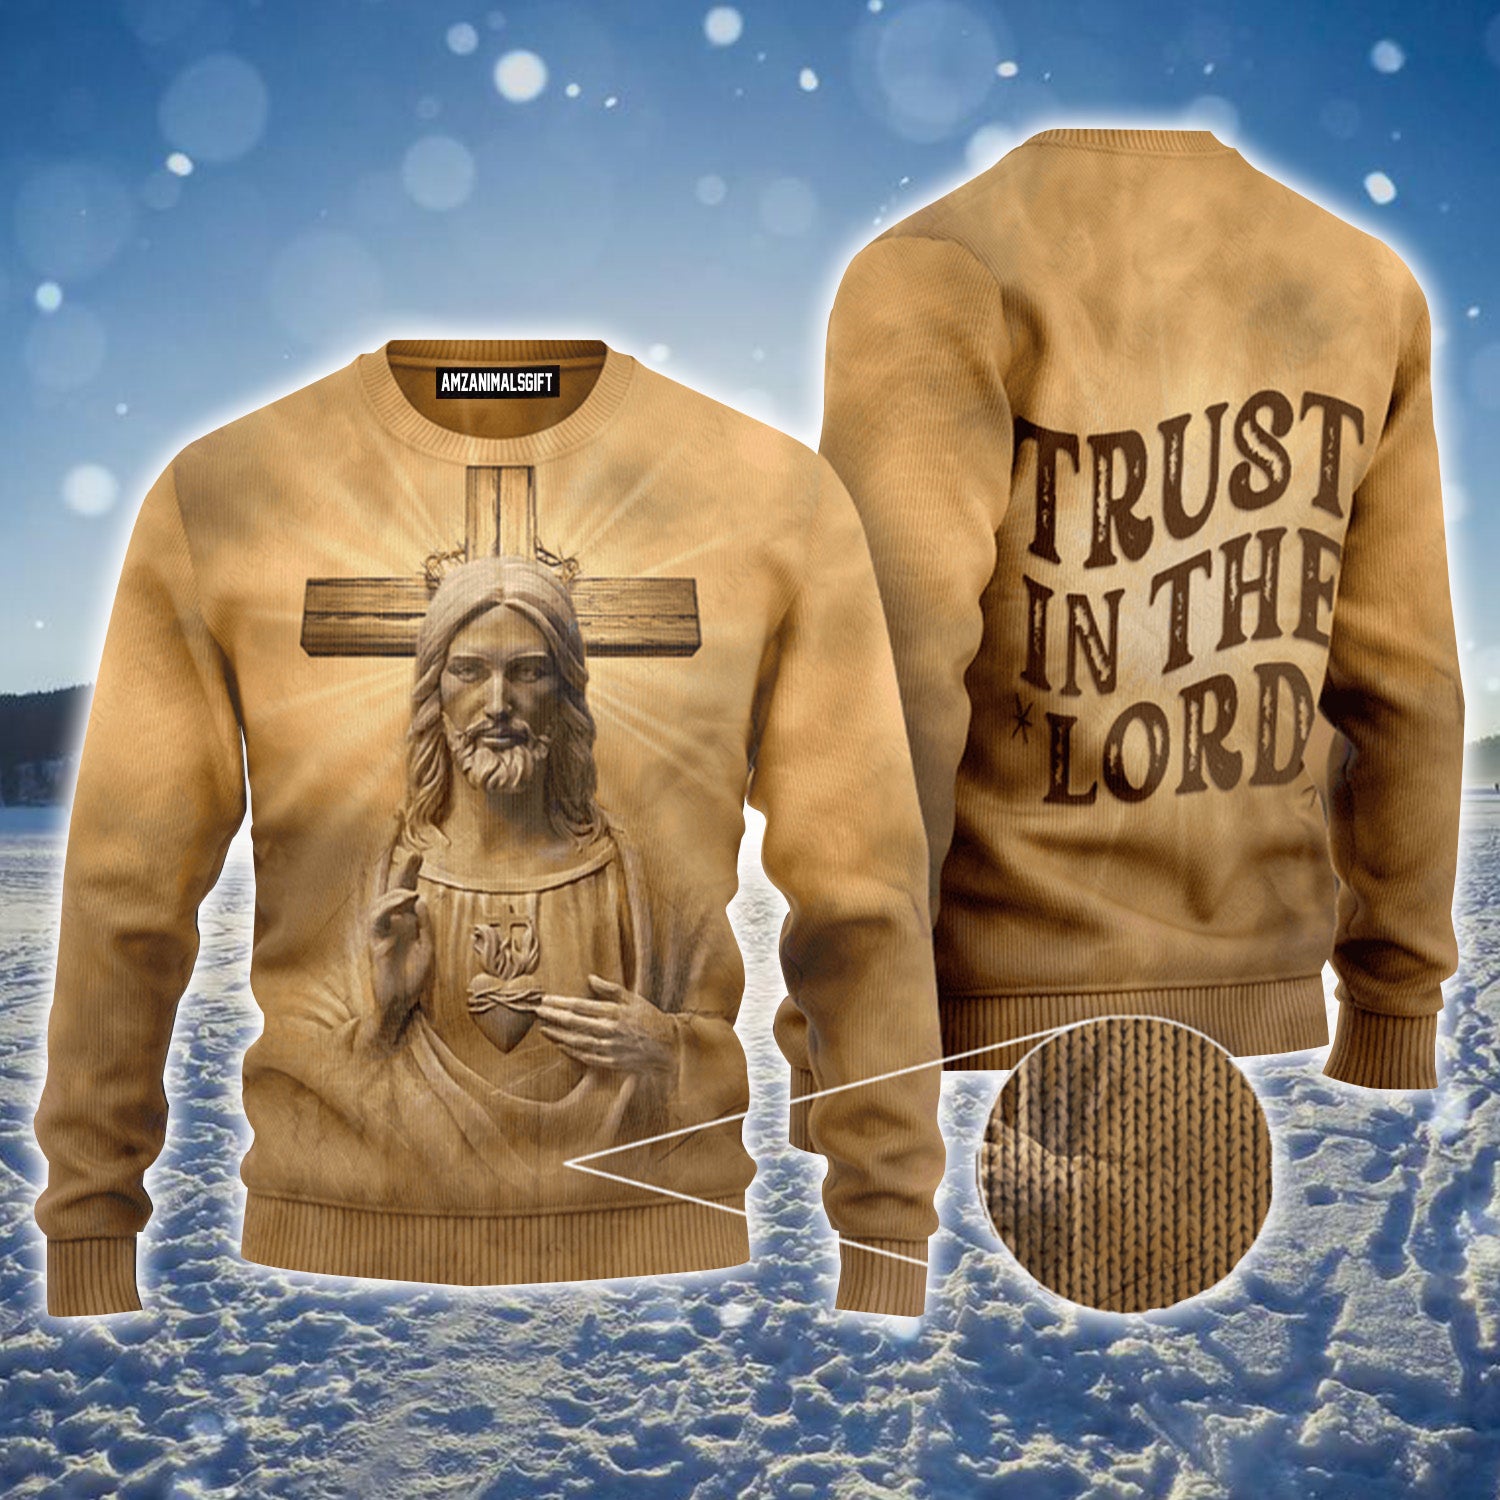 Vintage Jesus Cross Trust In The Lord Urly Sweater, Christmas Sweater For Men & Women - Perfect Gift For New Year, Winter, Christmas